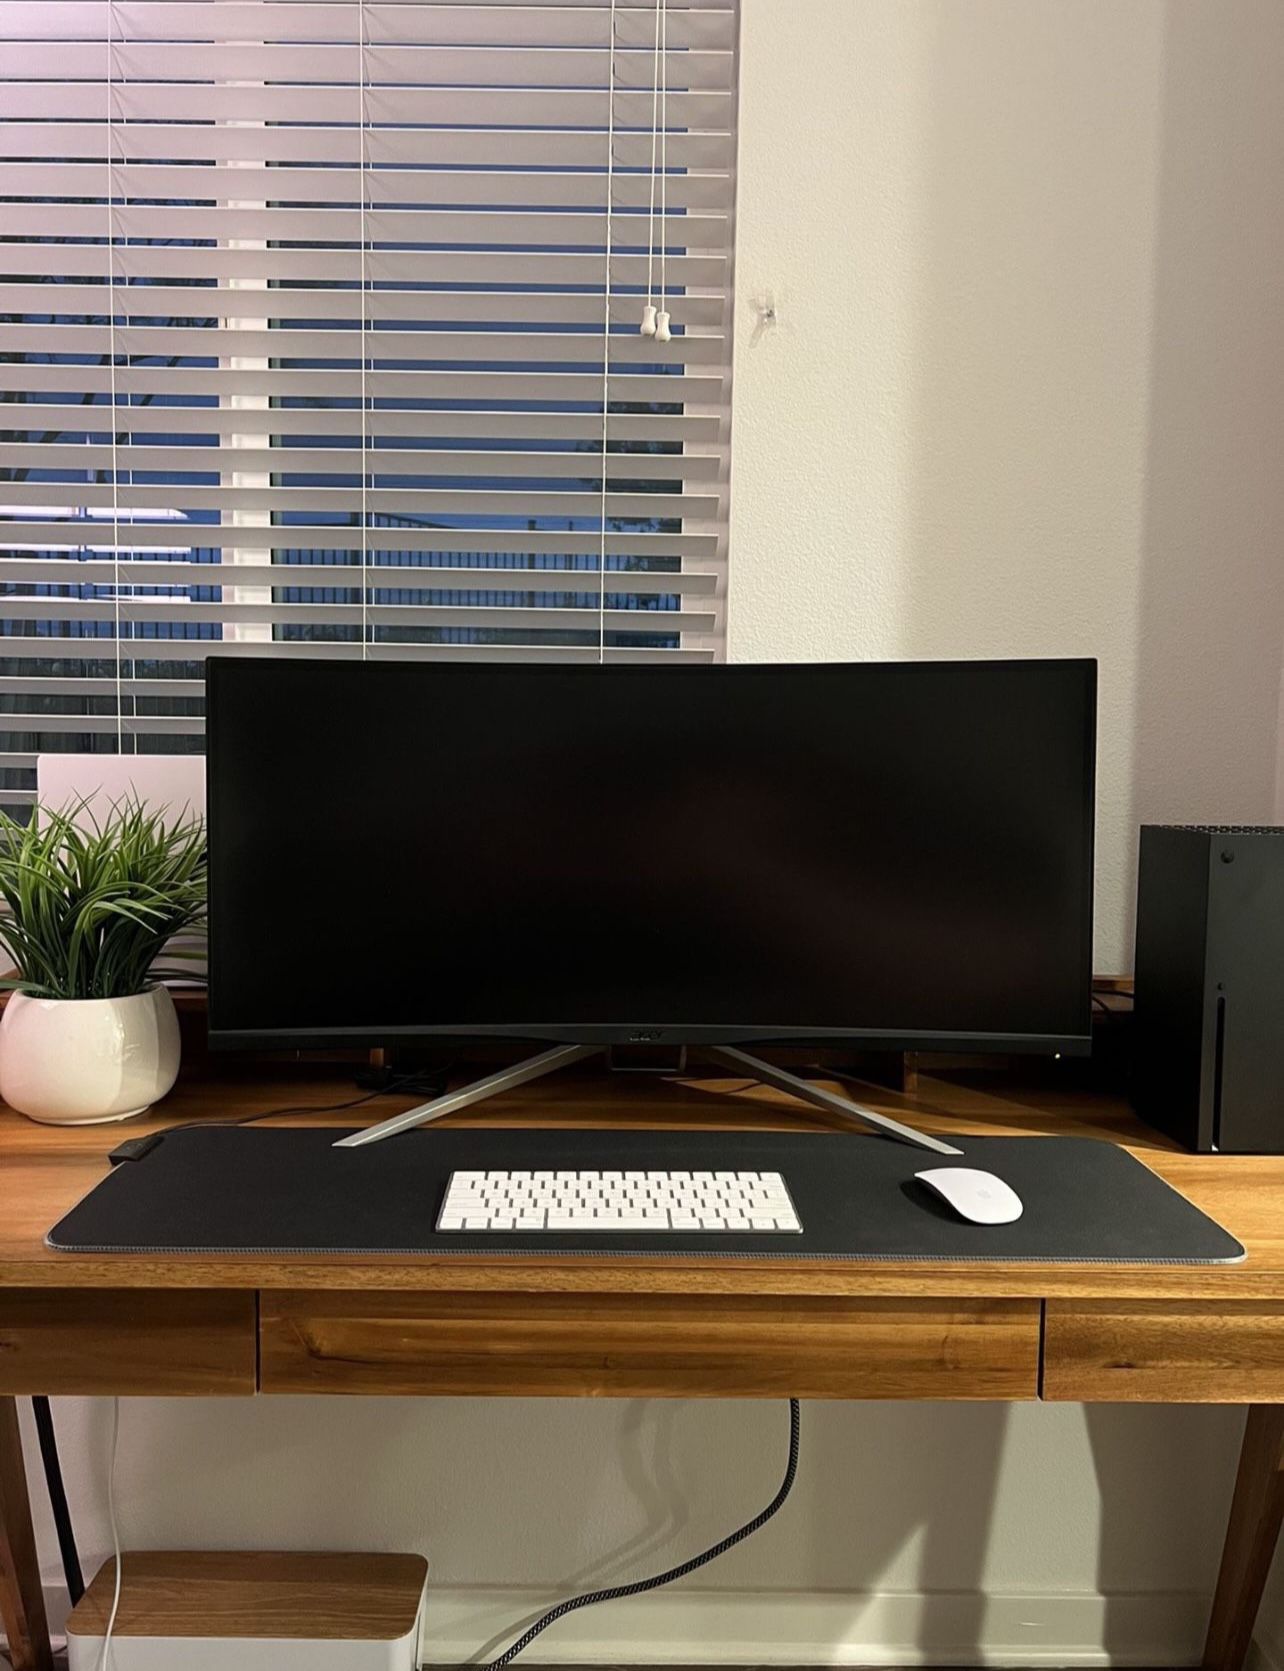 Acer XR342CK Curved Monitor (Excellent Condition)